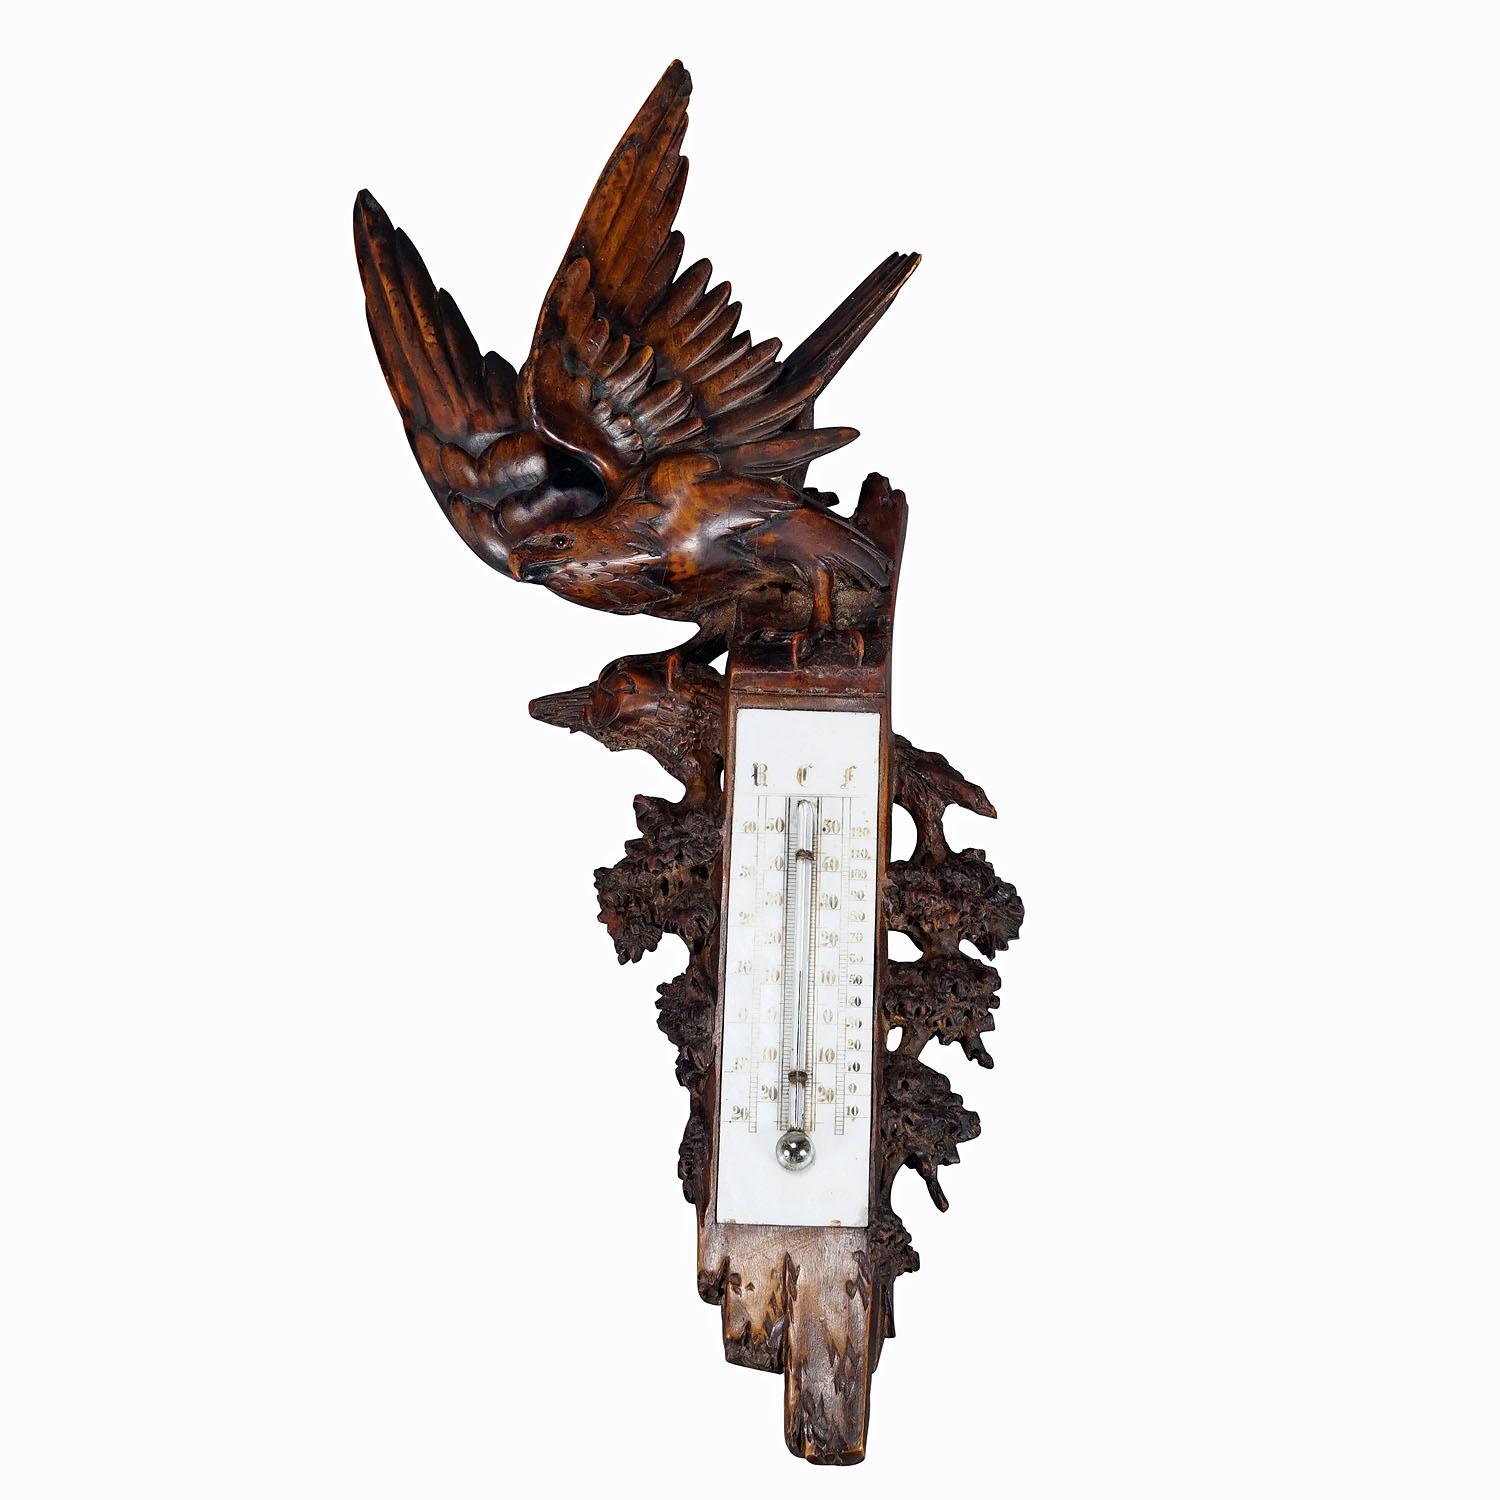 A Wooden Carved Black Forest Weather Station with Eagle
Item e7258
A large Black Forest meteorological station with thermometer. Handcarved with an impressive carved eagle on top and decorated with elaborate foliage carvings. Executed in Brienz,